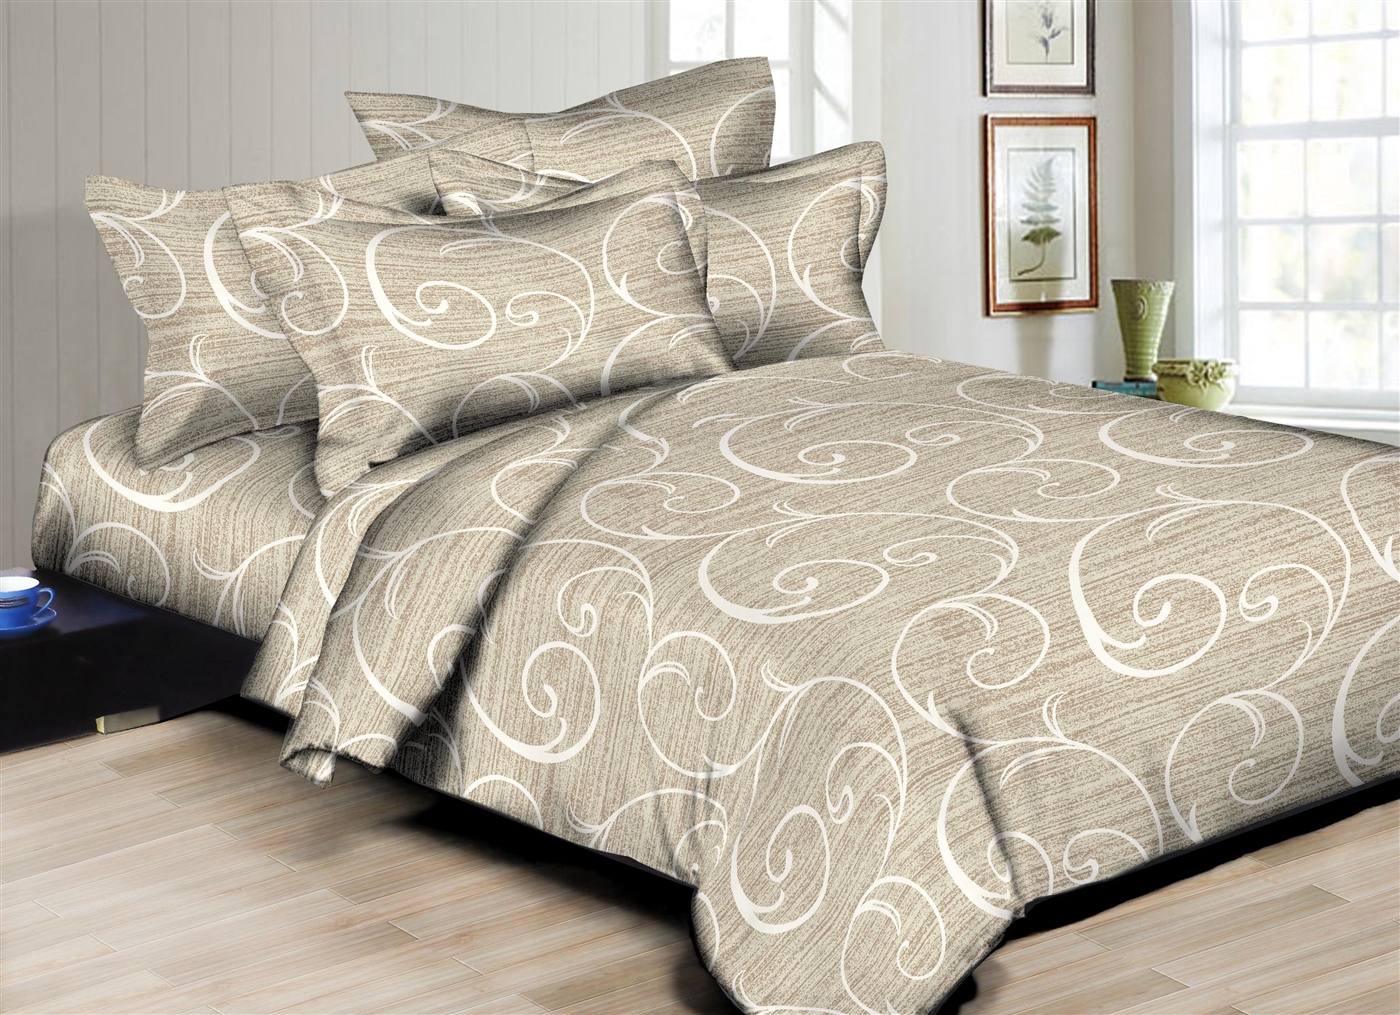 Better Bed Collection Wild Vines 8PC Bedding Sets - 300 Thread Count